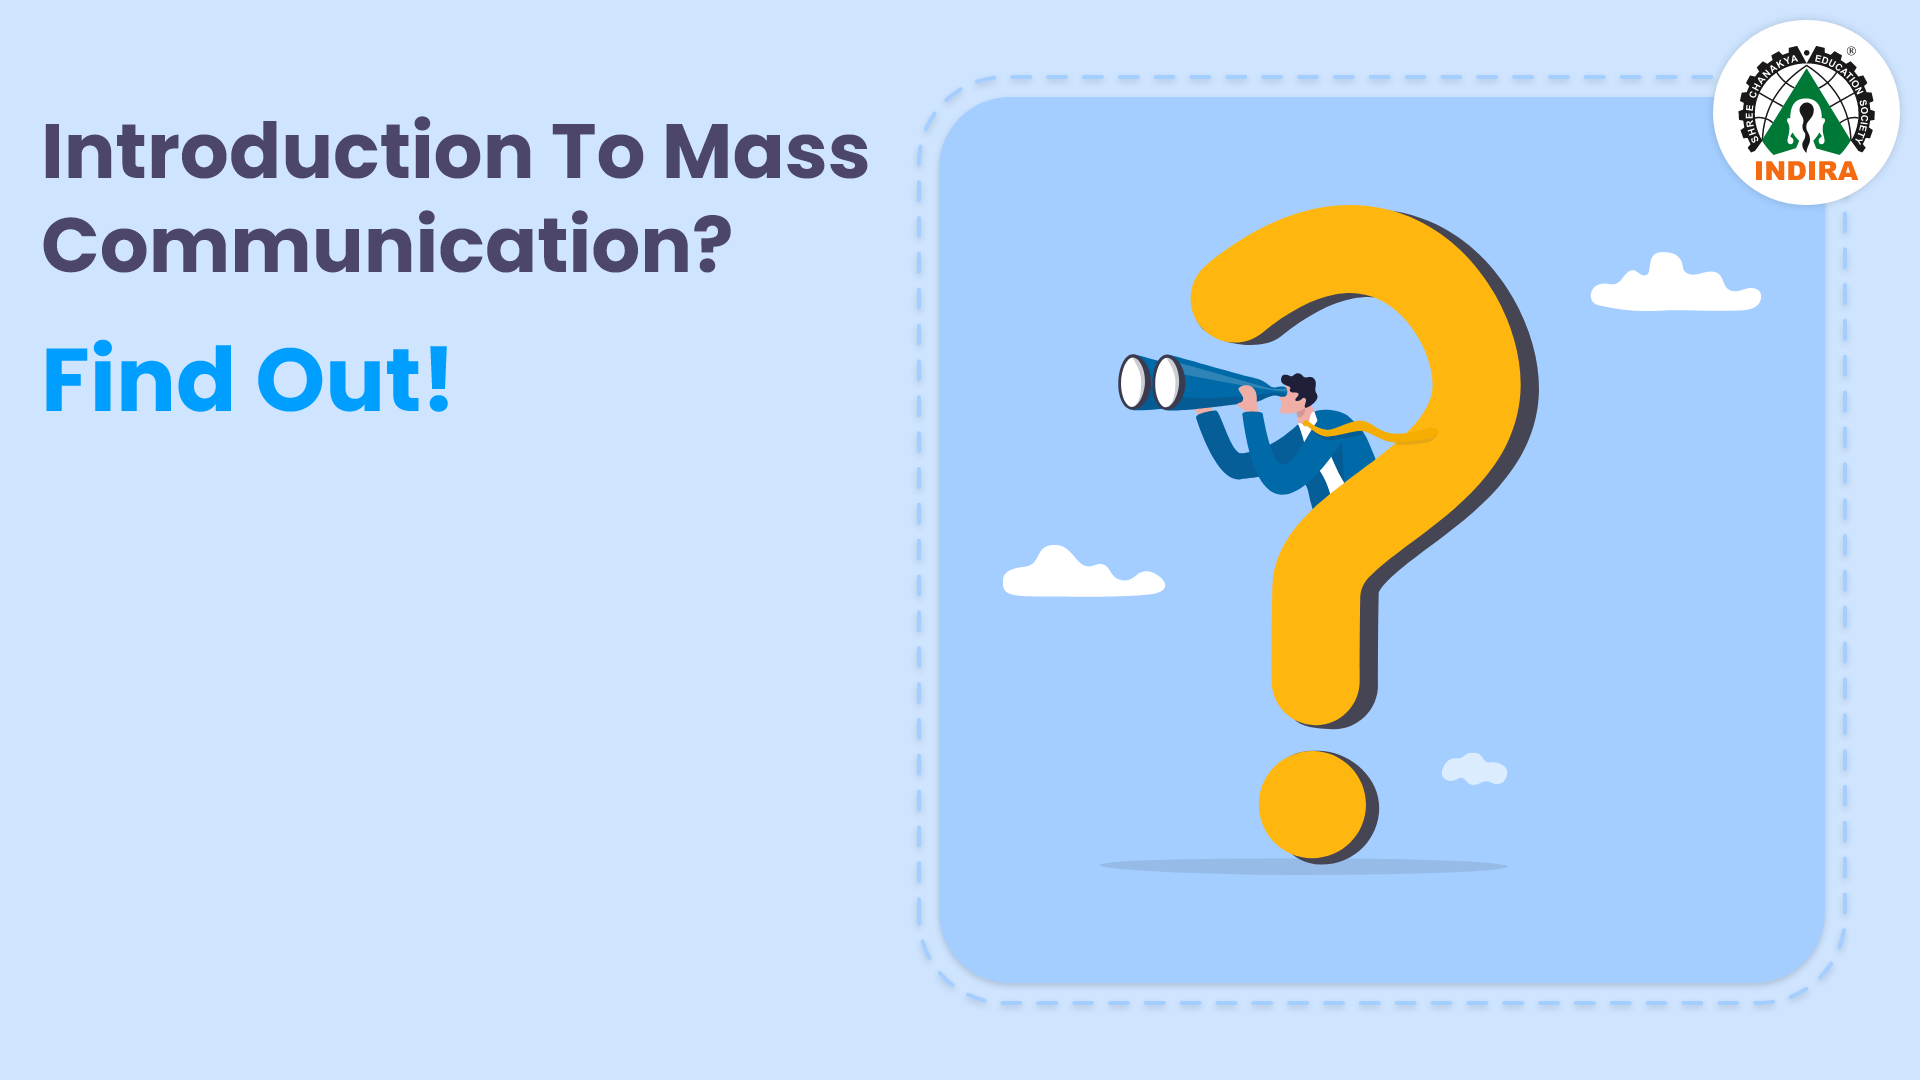 Introduction To Mass Communication? Find Out!